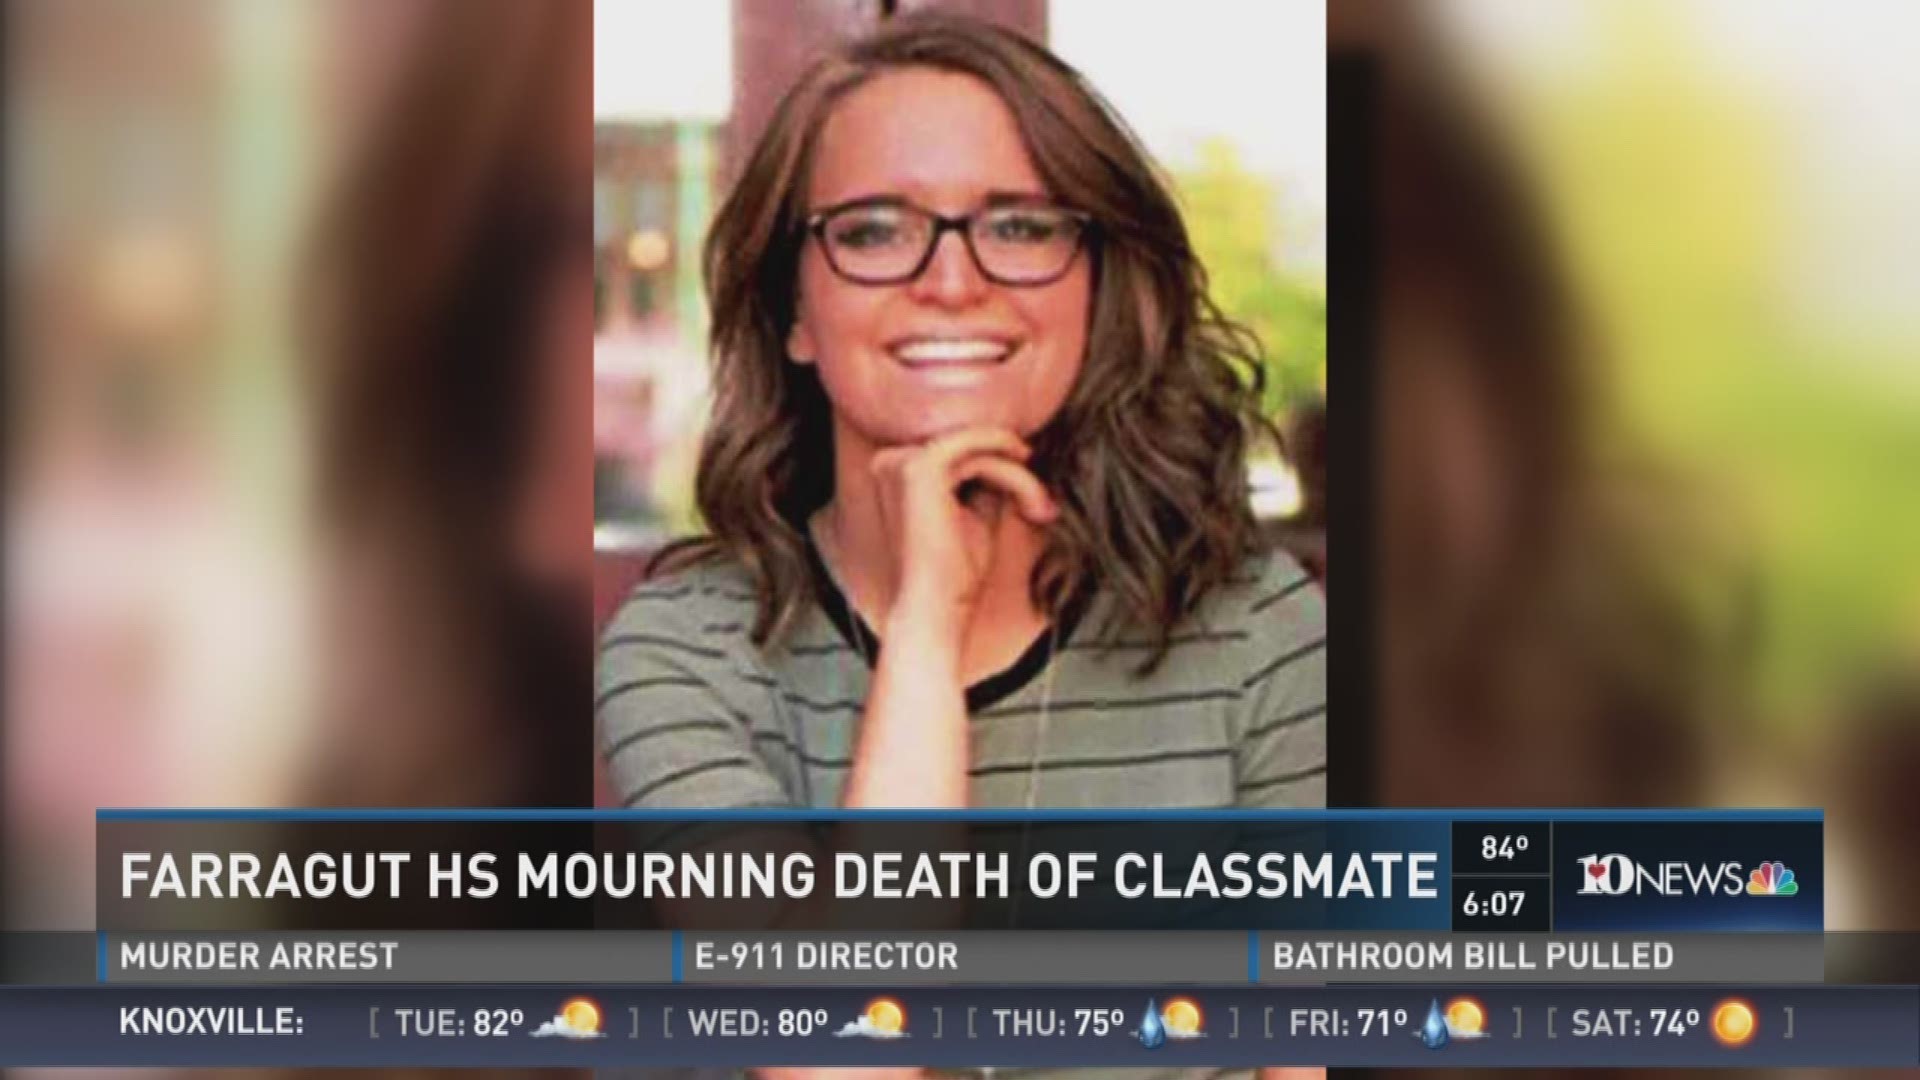 Memorial services for a Farragut High School senior are set for Wednesday evening. 18-year-old Taylor Corum died Saturday morning. 10News reporter Becca Habbeger has more on her life.